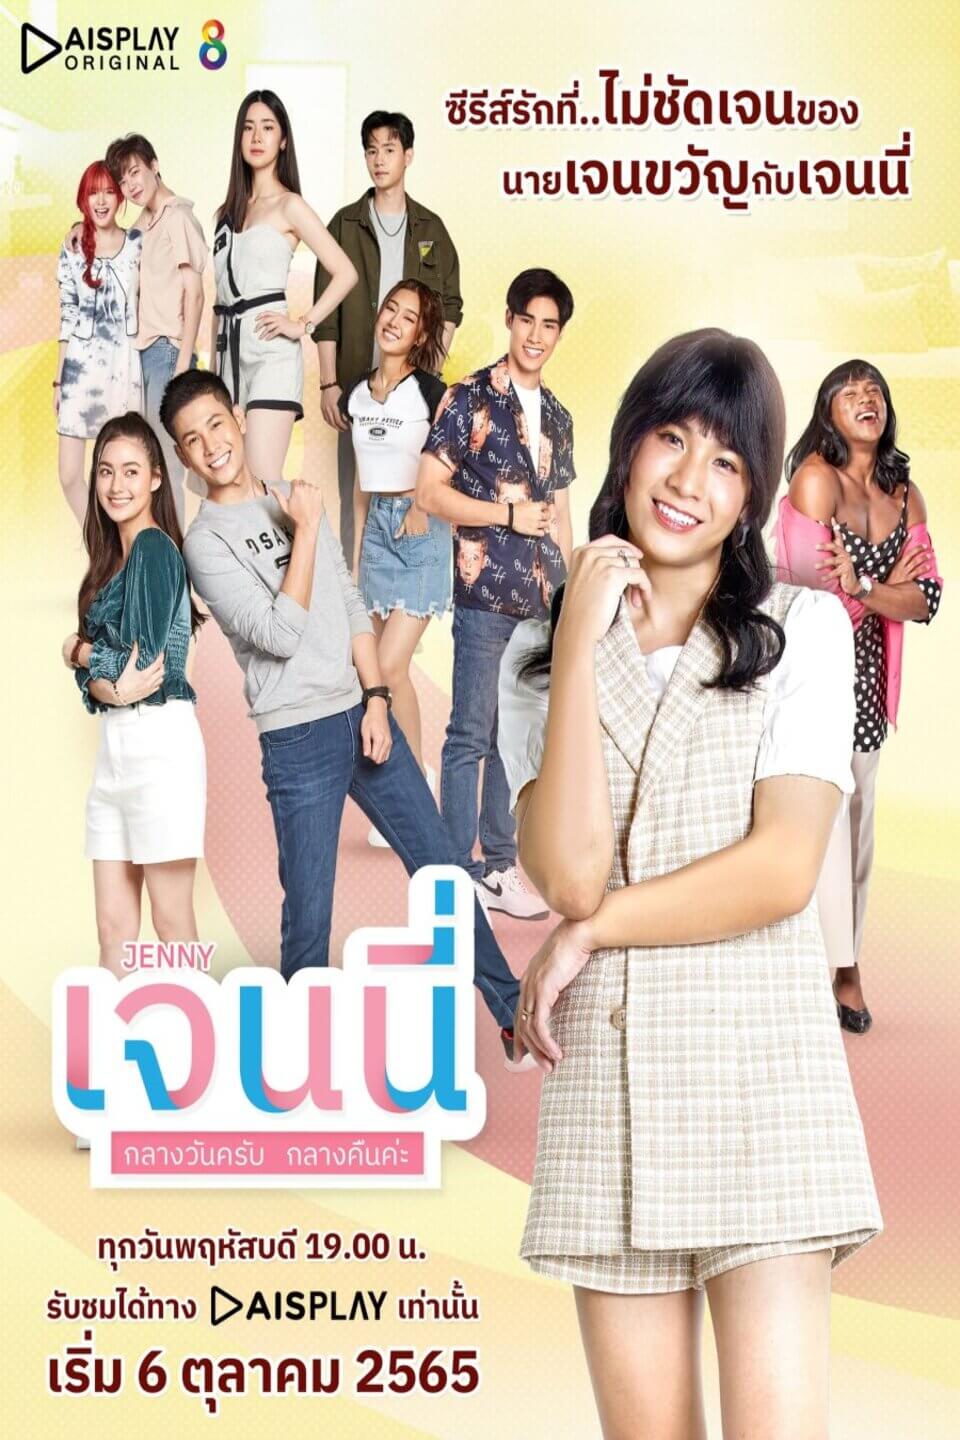 TV ratings for Jenny A.M/P.M (เจนนี่ กลางวันครับ กลางคืนค่ะ) in Argentina. Channel 8 TV series